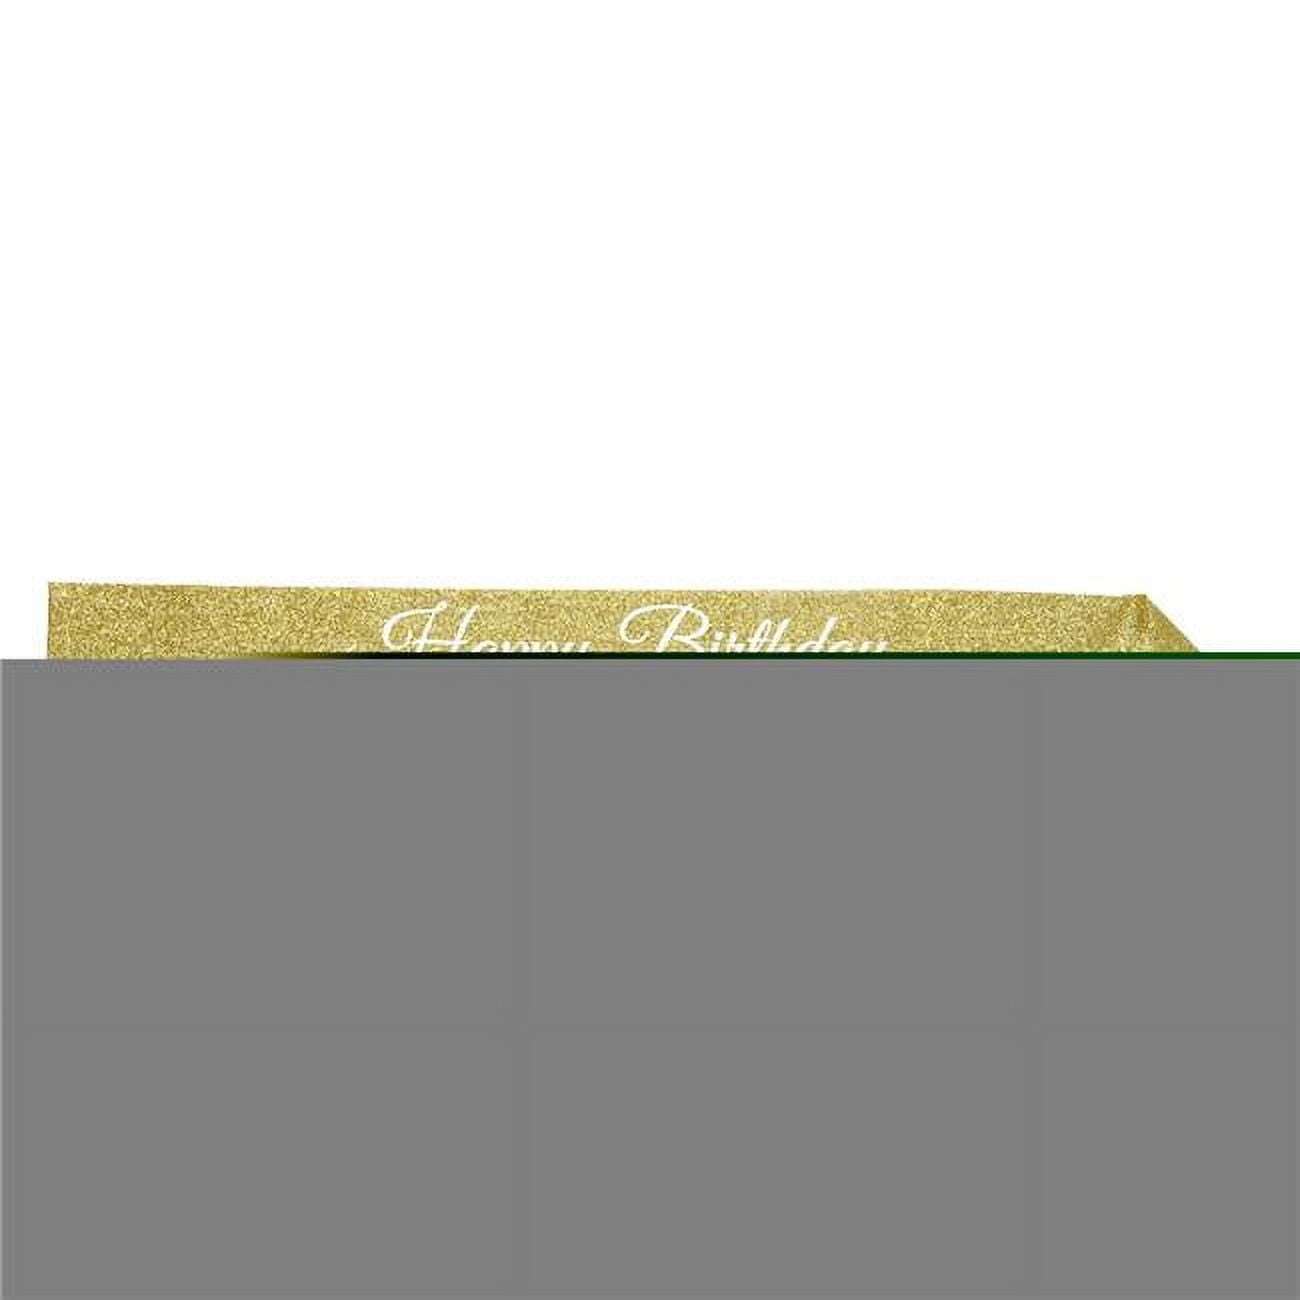 Picture of Beistle 66037 32.5 x 3.5 in. Happy Birthday Glittered Sash